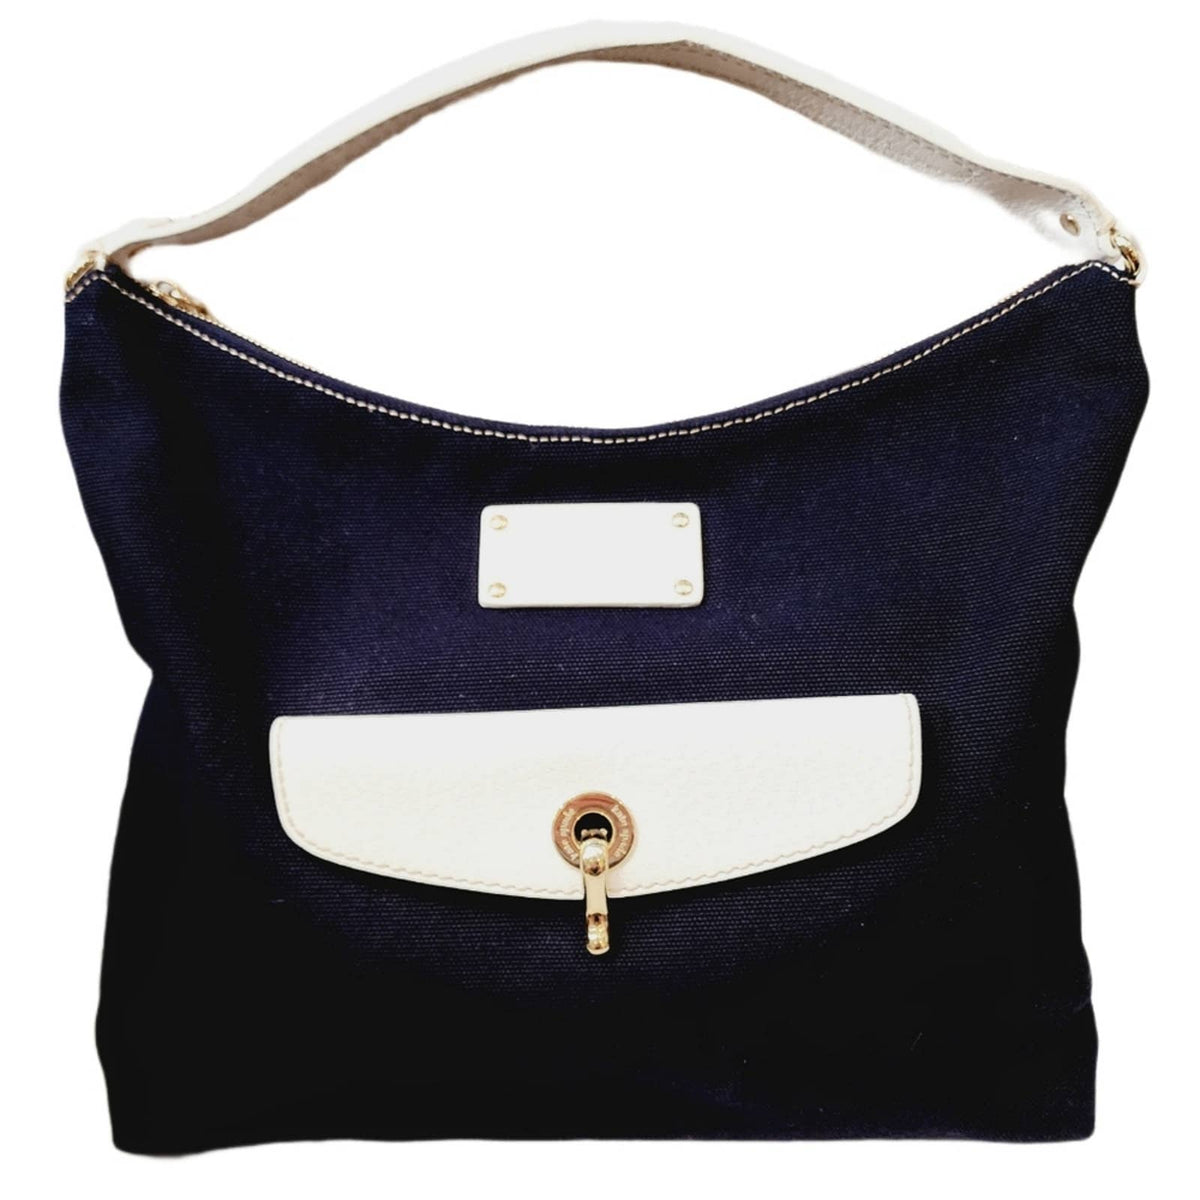 Pre-loved Kate Spade Navy Canvas w/White Leather Top Zip Shoulder Bag ...